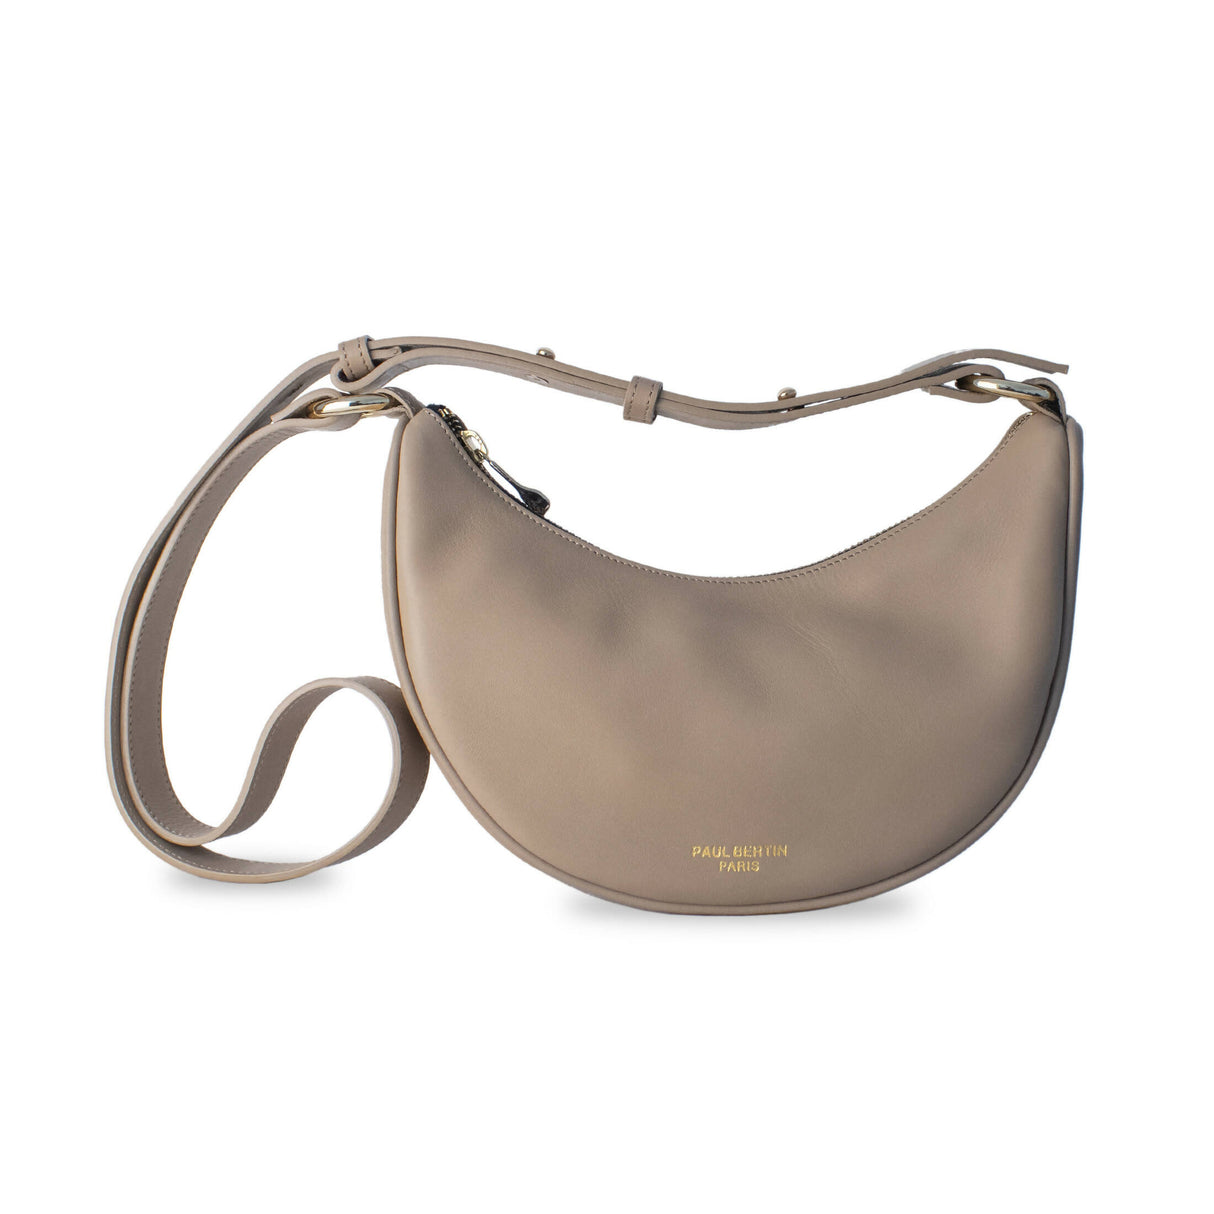 Smooth beige leather fanny pack